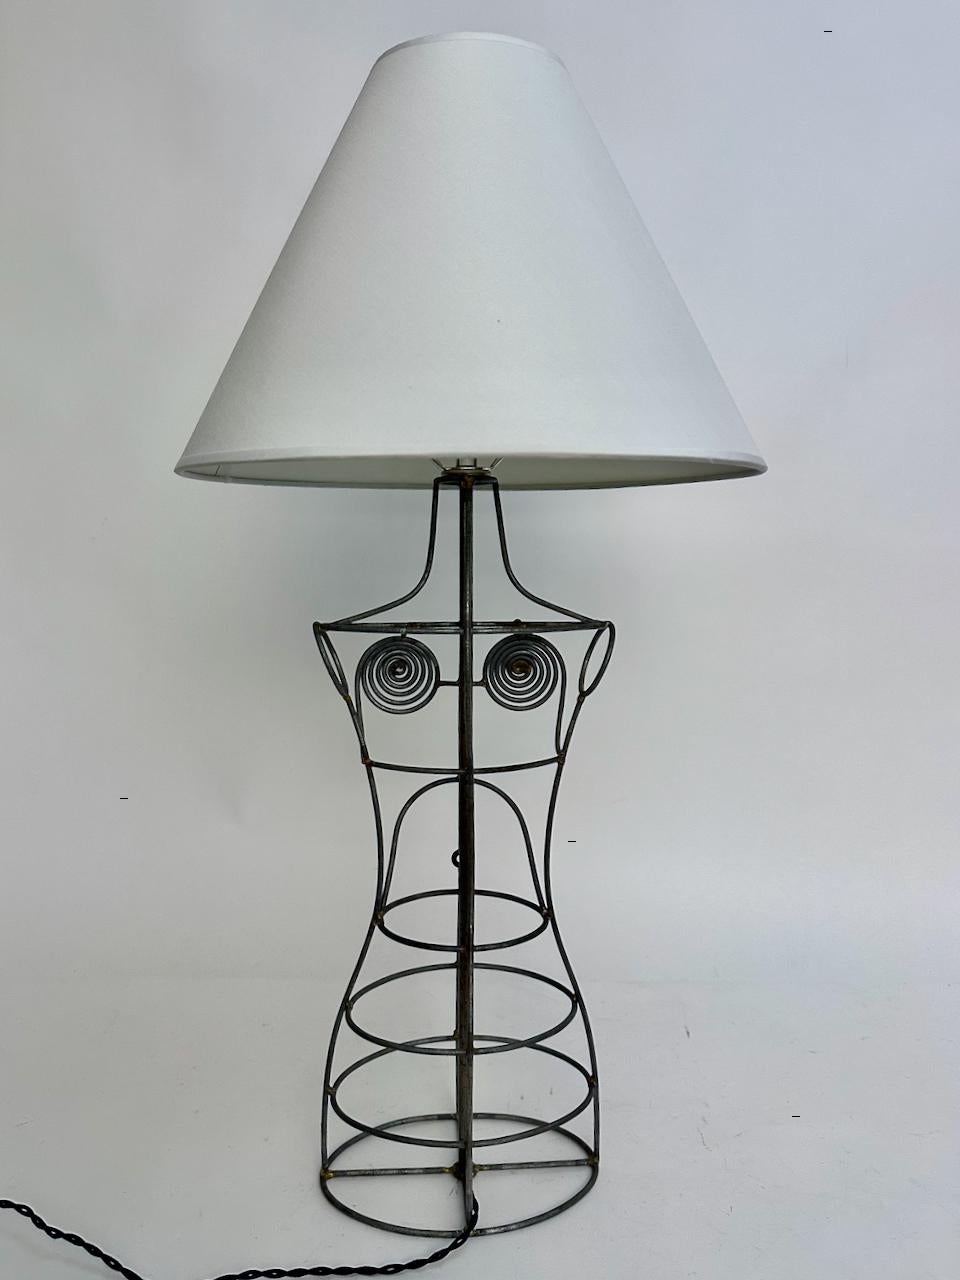 French Welded Steel Wire Dress Form Table Lamp, C. 1970 For Sale 1